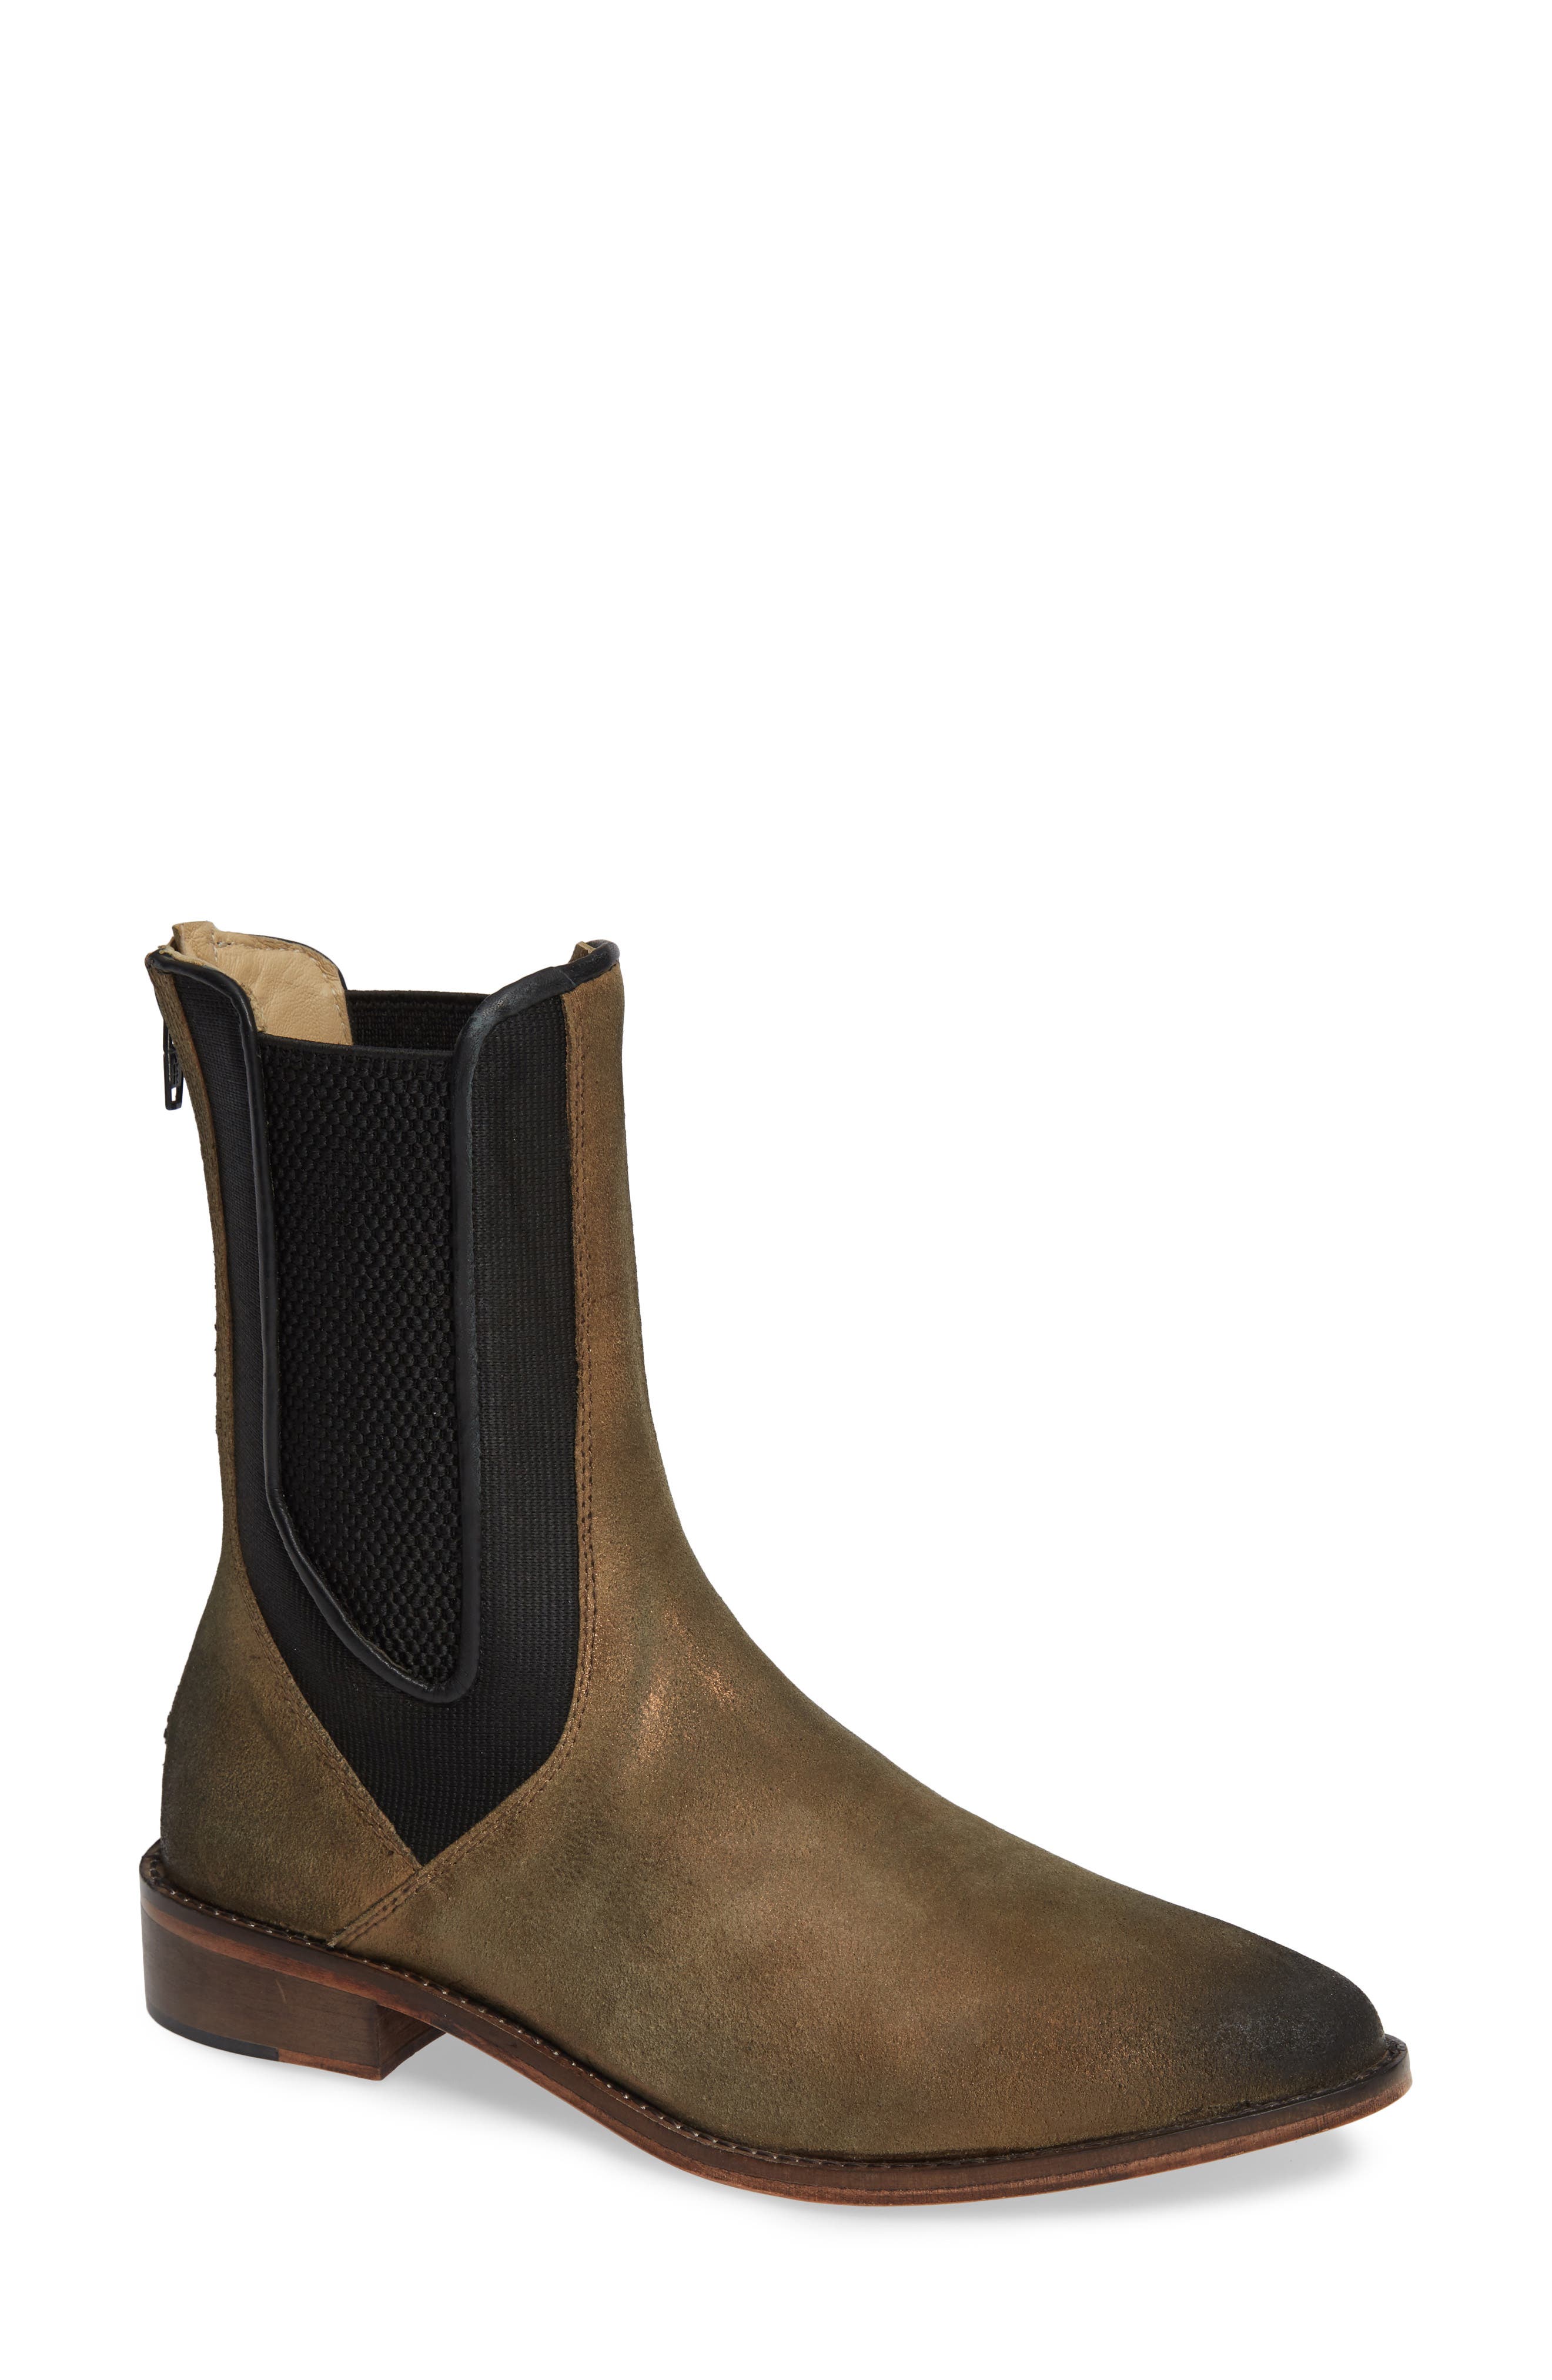 nordstrom womens chelsea boots